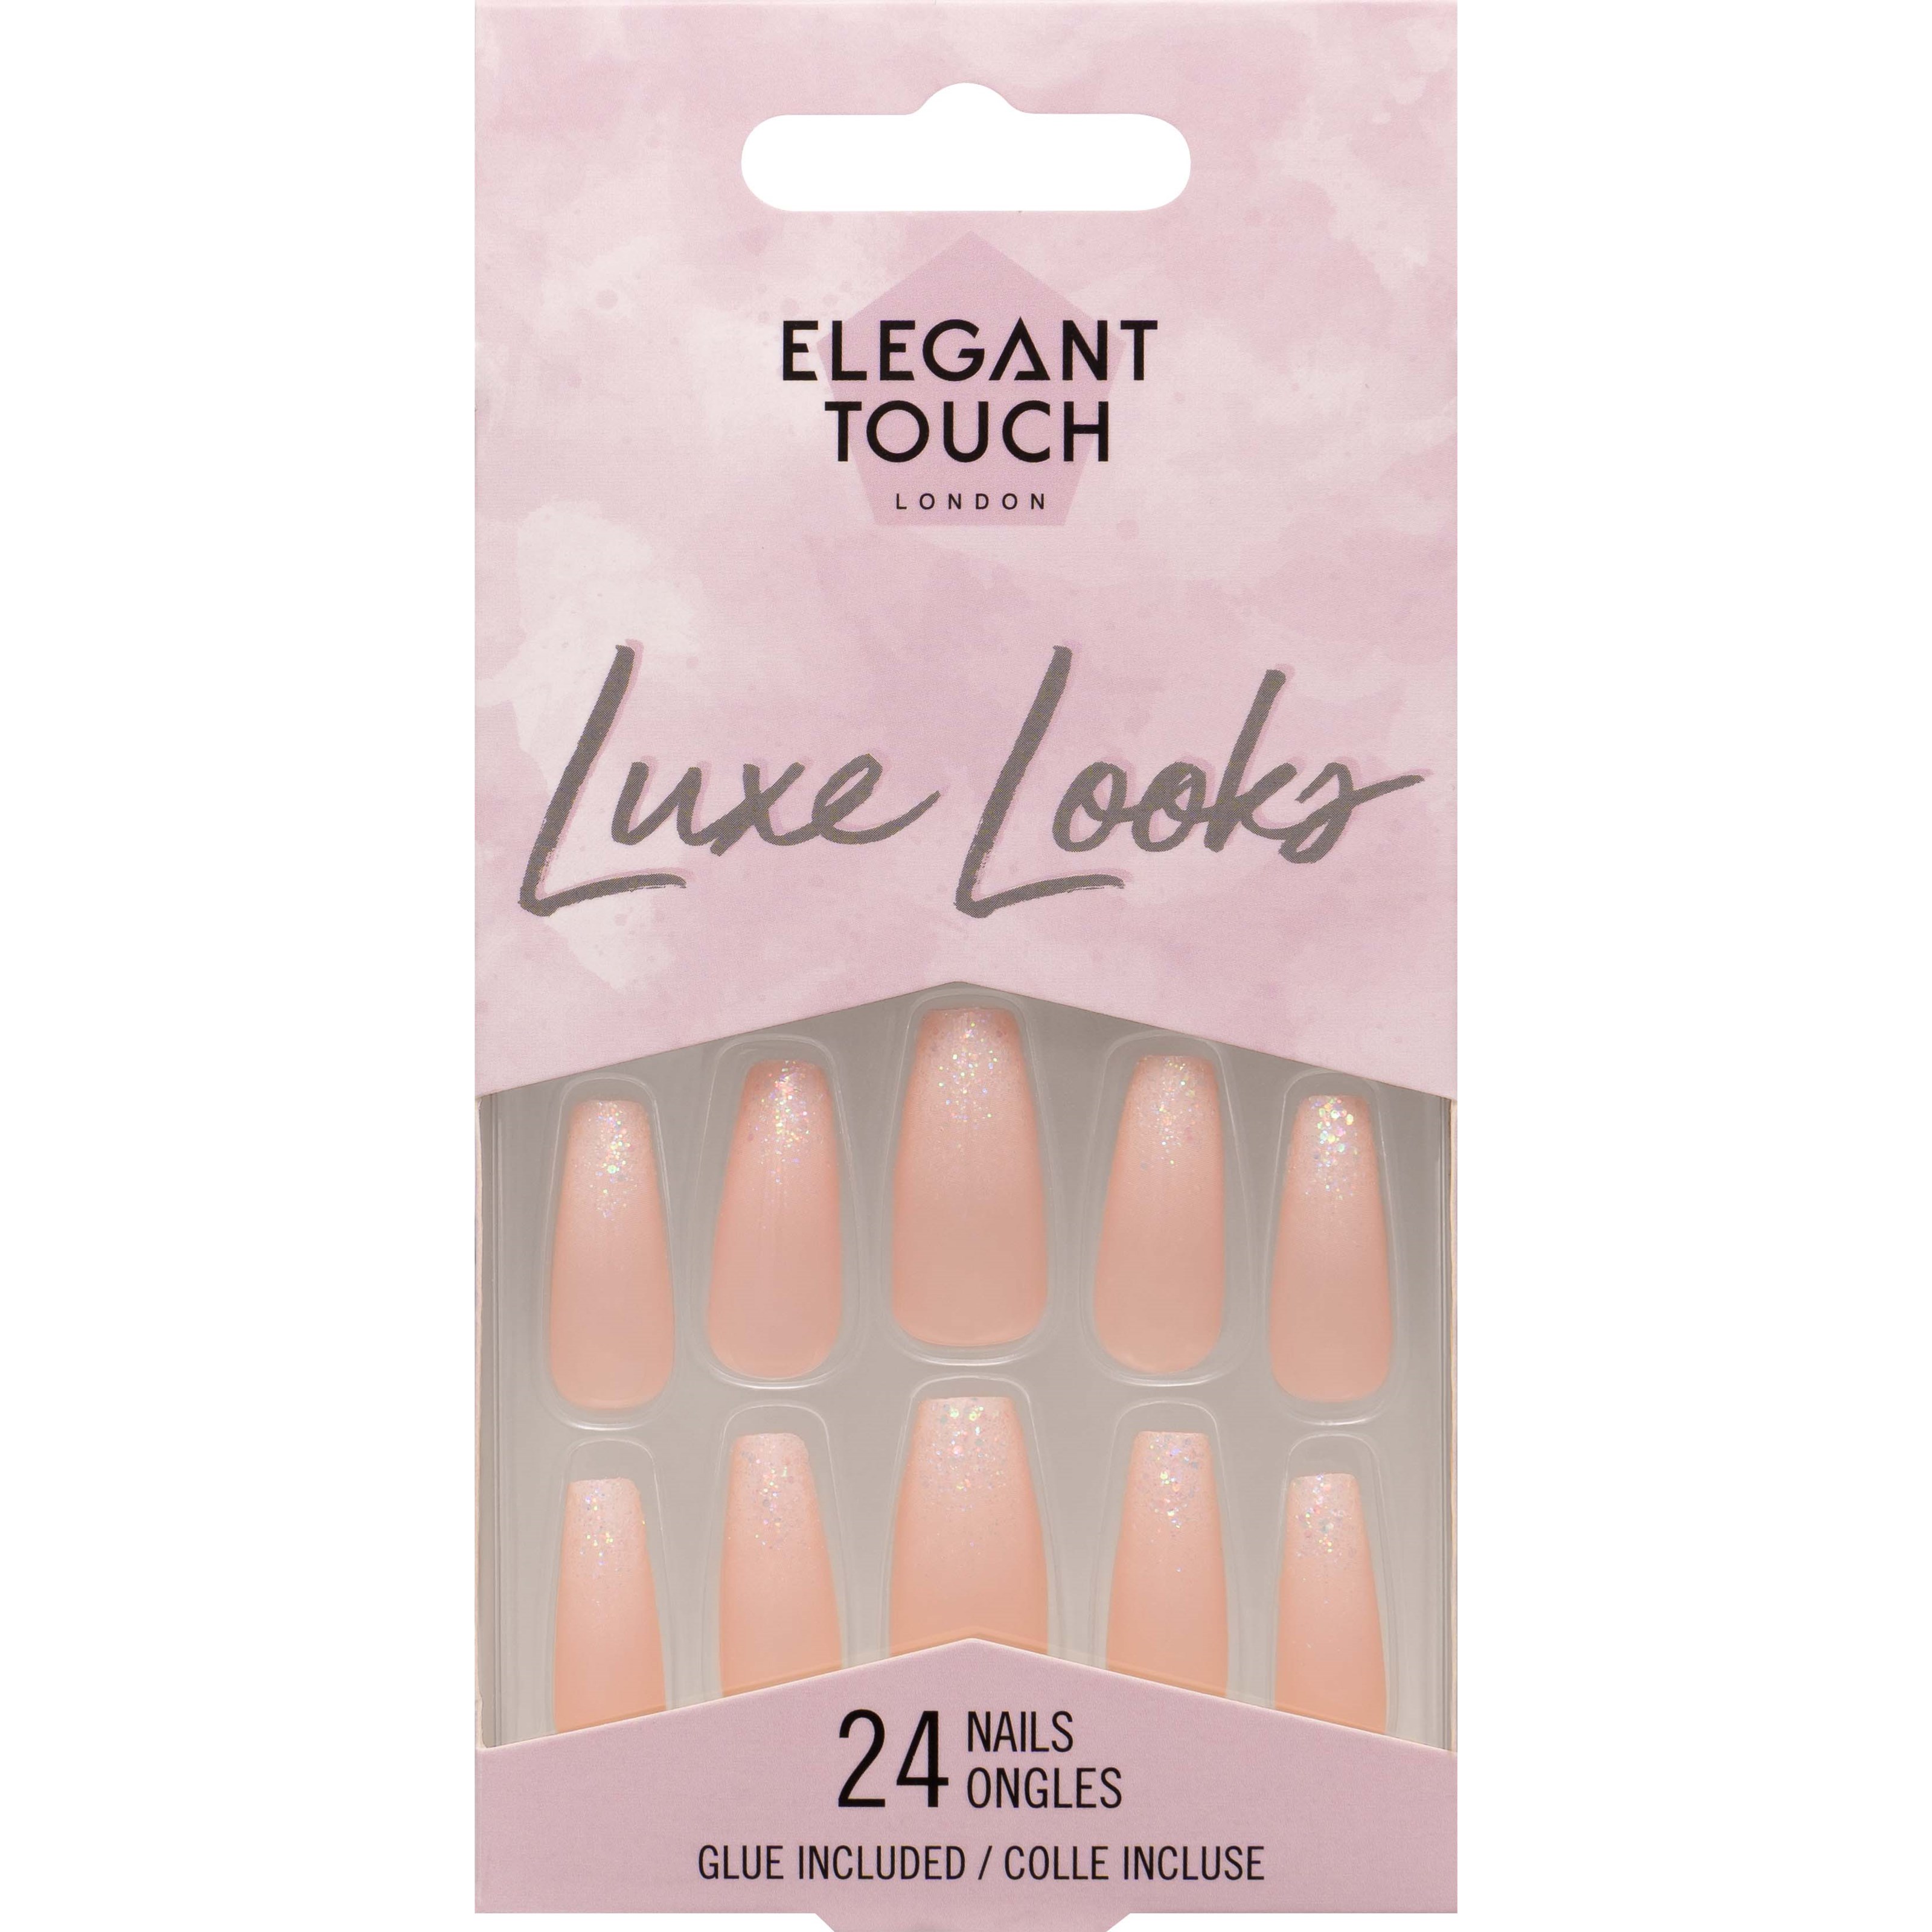 Elegant Touch Luxe Looks Sugar Cookie